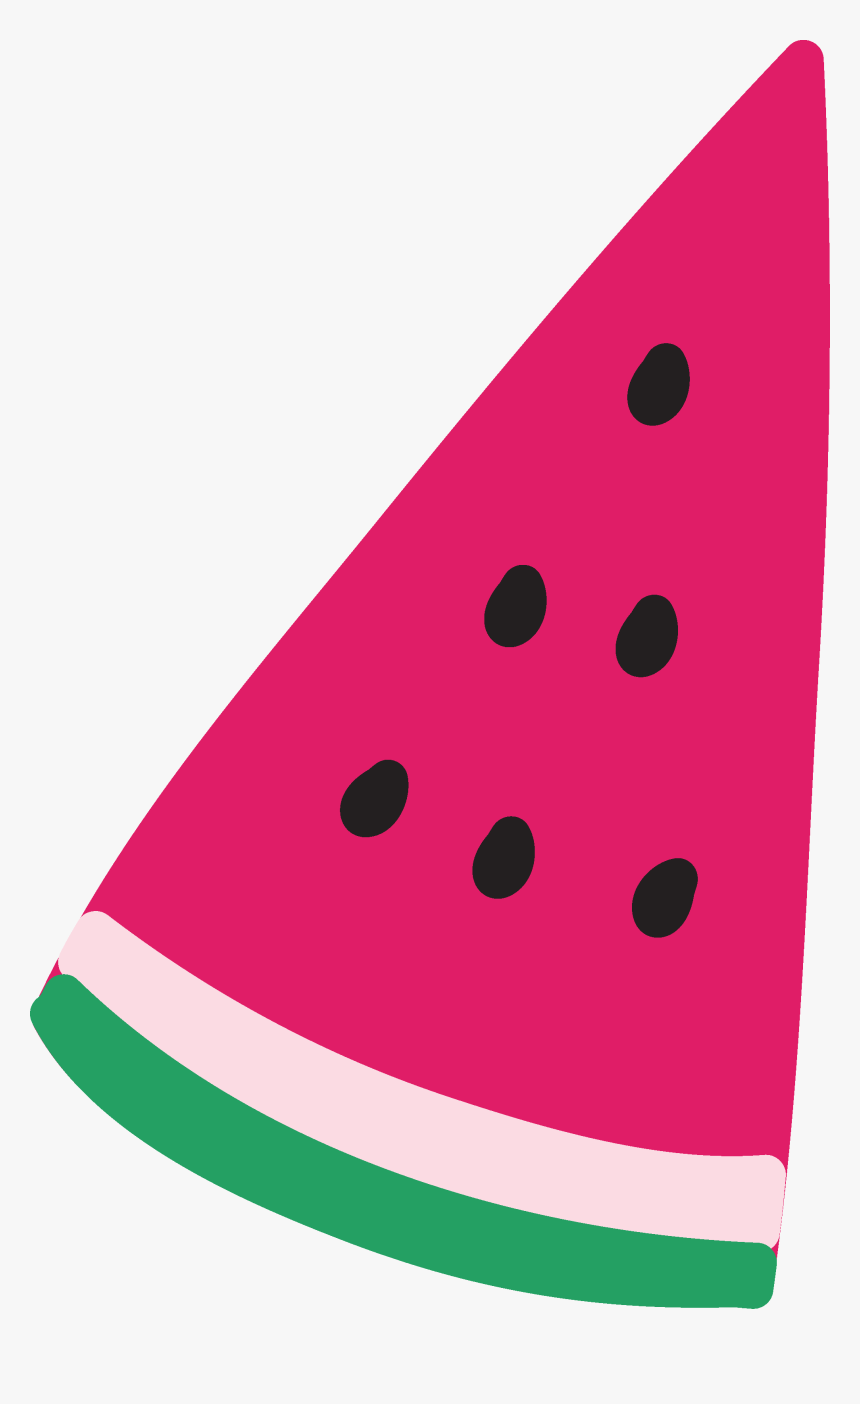 Download 18+ Free Watermelon Svg Background Free SVG files ...